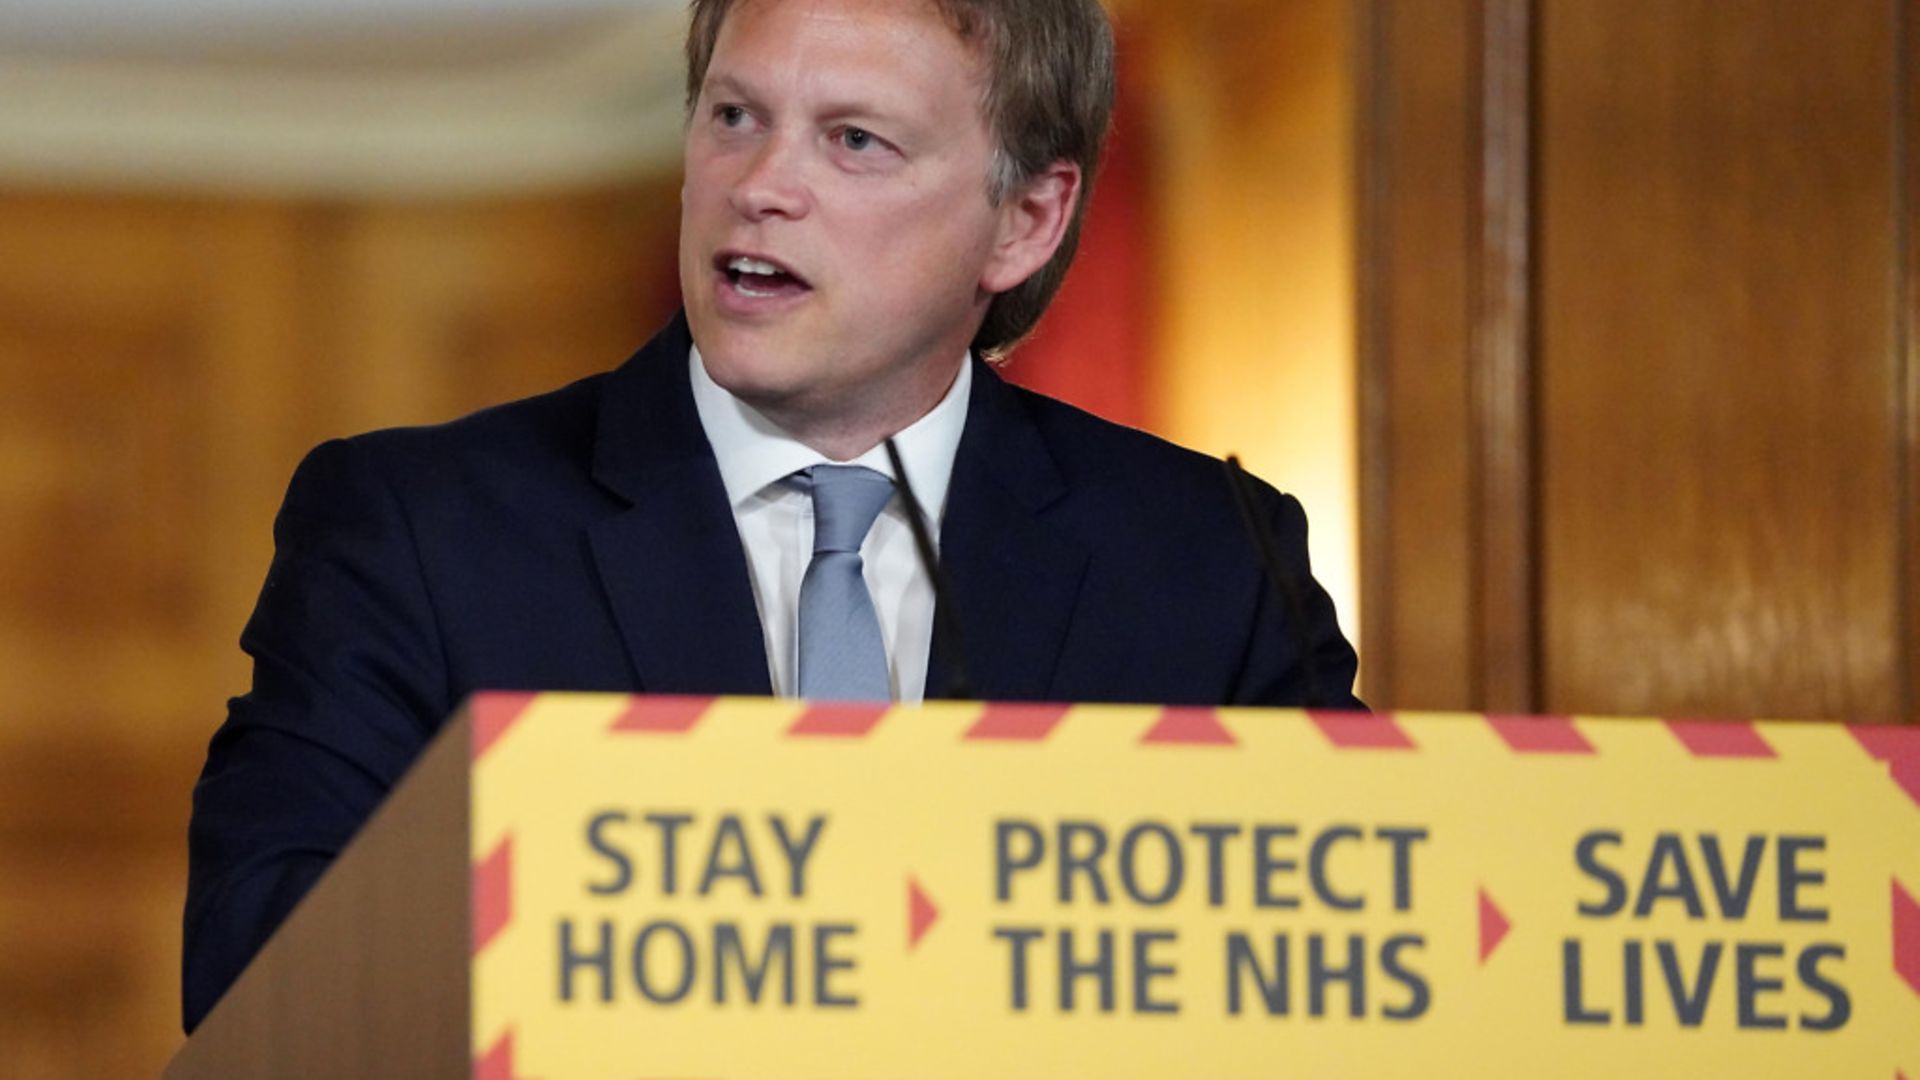 Transport secretary Grant Shapps during a media briefing in Downing Street on coronavirus (COVID-19) - Credit: PA